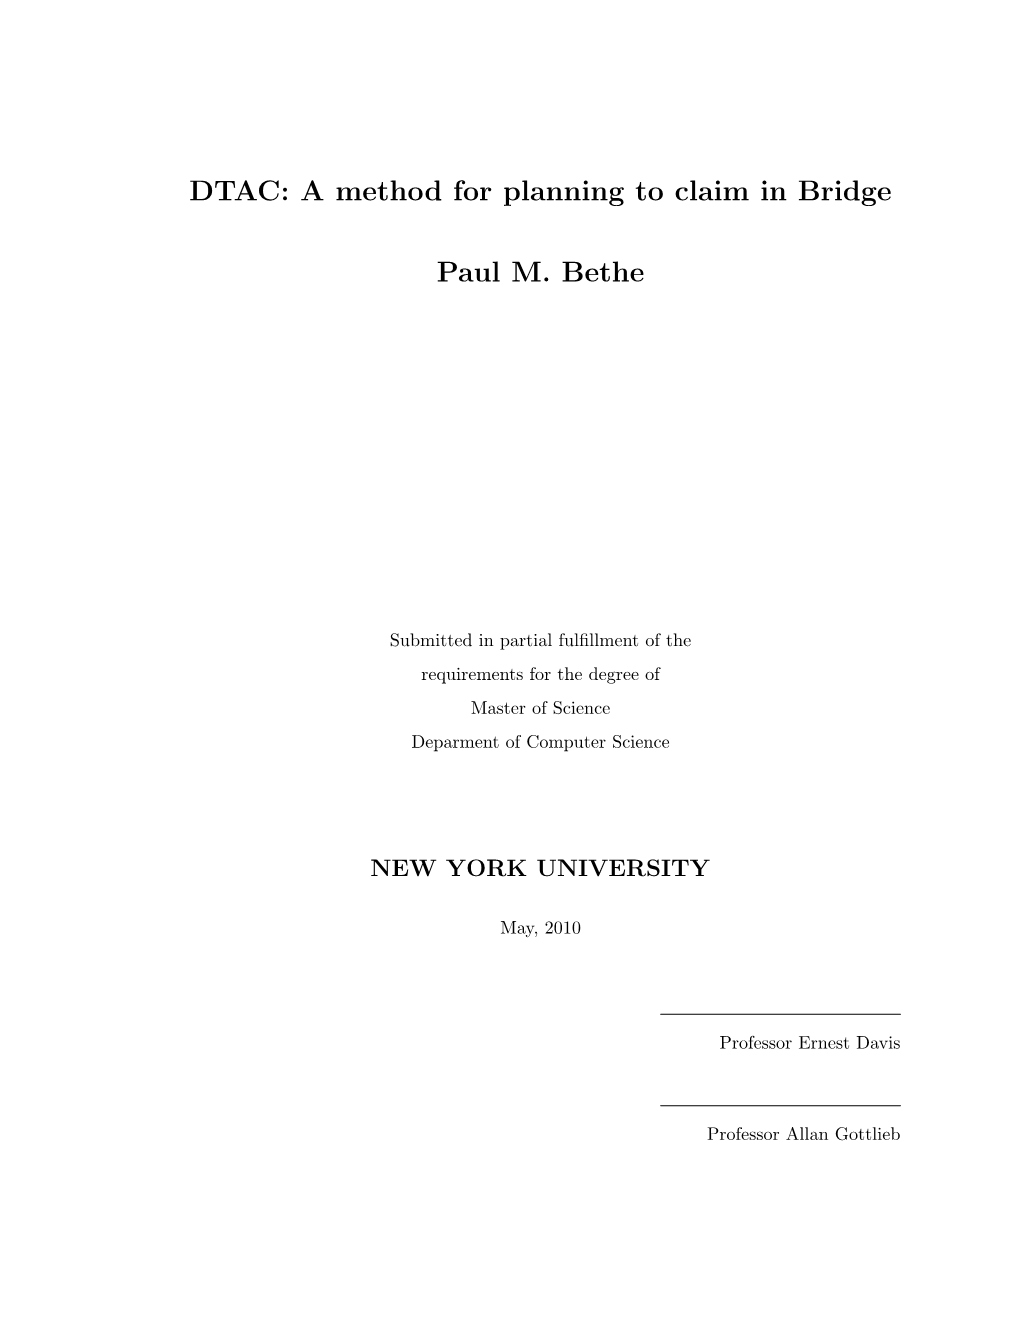 DTAC: a Method for Planning to Claim in Bridge Paul M. Bethe